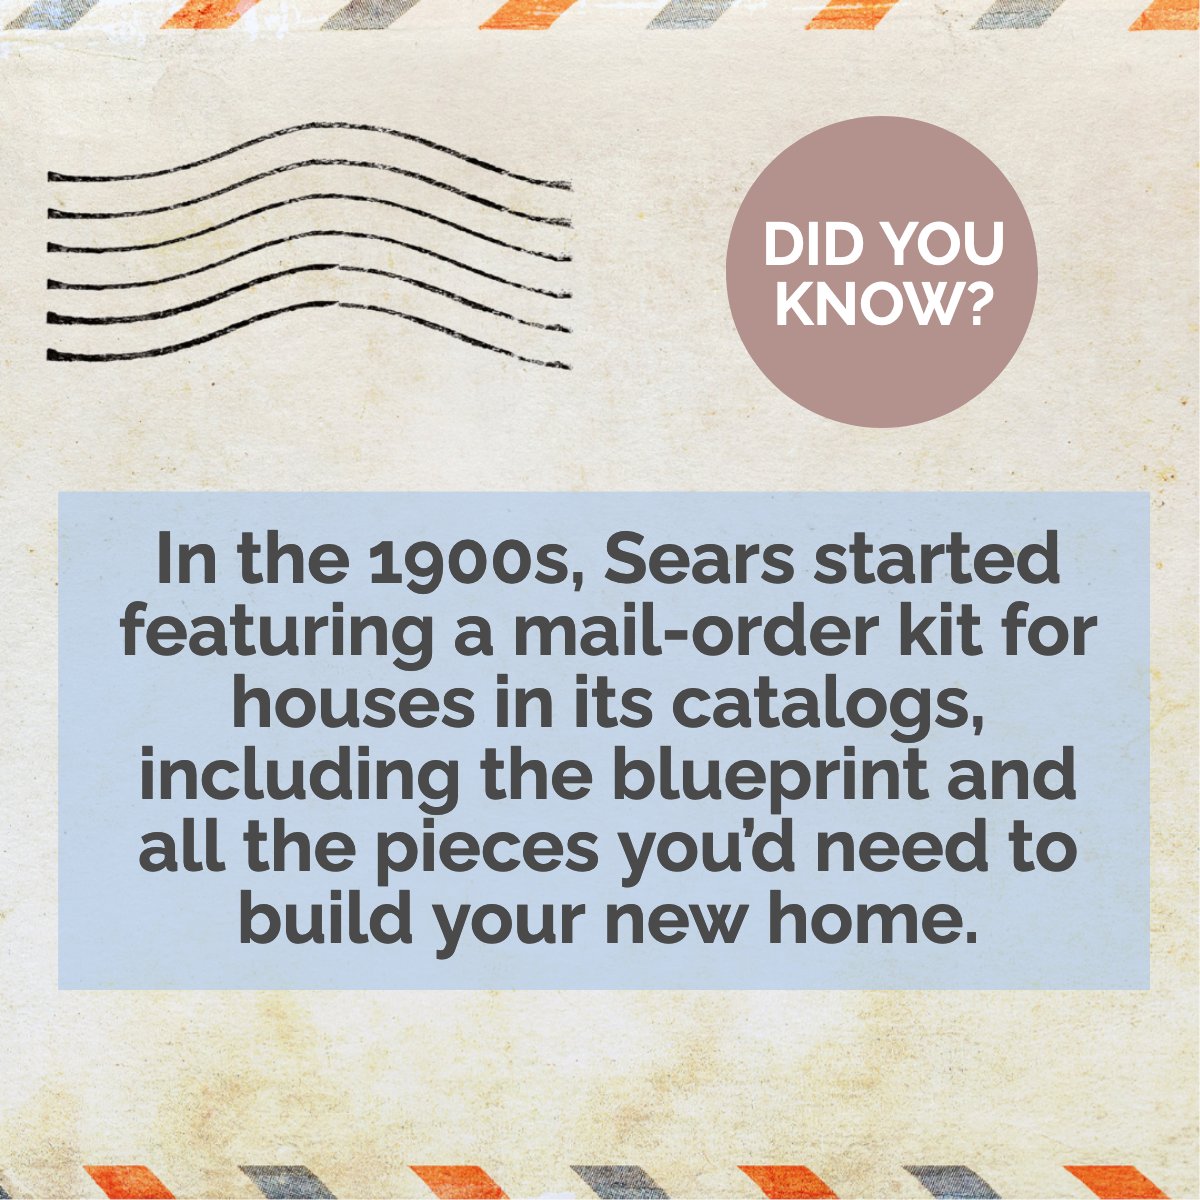 Did you know?

The house that came in the mail.
✉️📬🏡

#didyouknow #fact #1900s  #mail #goodtoknow #randomfact #realestate #realestate101
 #thestonesrealestate #johnstone #Fresnohomes #clovishomes #letmebeyourrealtor #bestrealestateagentinfresno